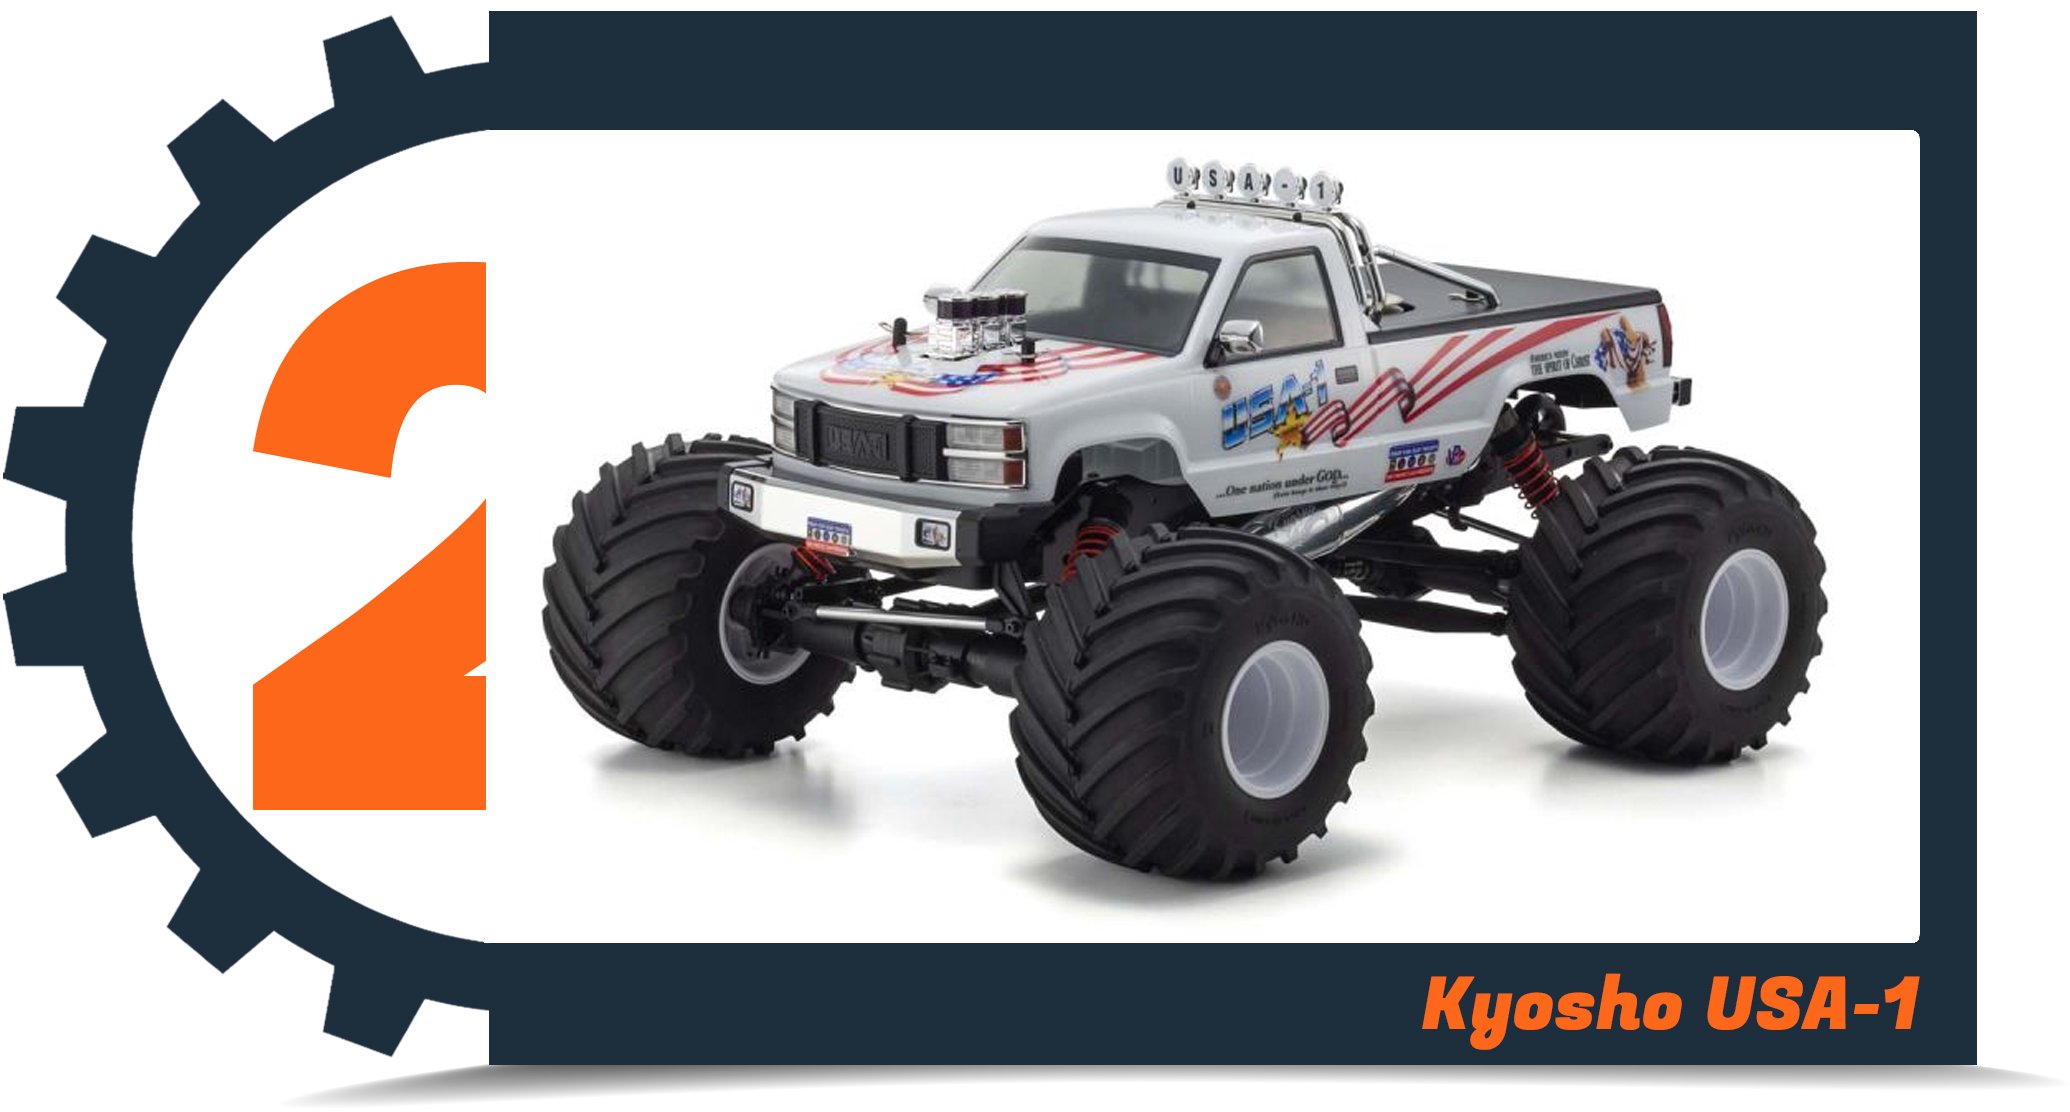 Top 10 RC Cars for 2021 - Number 2 - Kyosho USA-1 1/8 Scale Nitro Truck